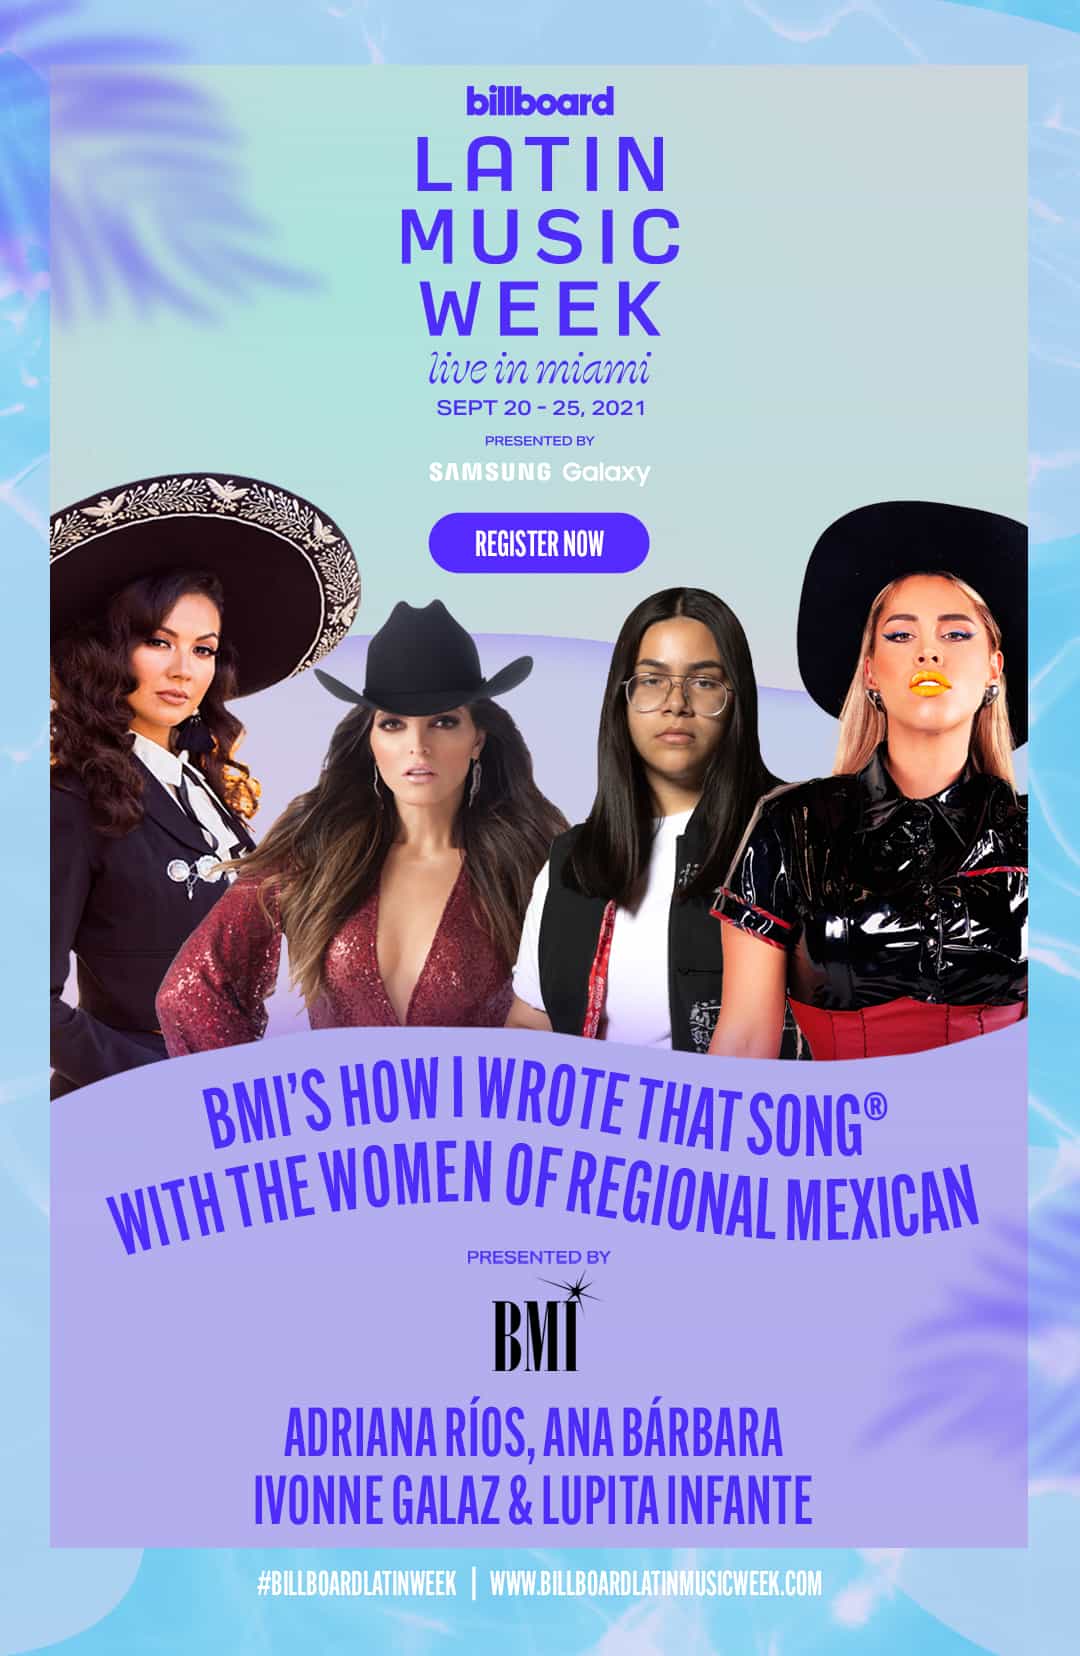 BMI’s “How I Wrote That Song®” all-female panel heads to Billboard Latin Music Week